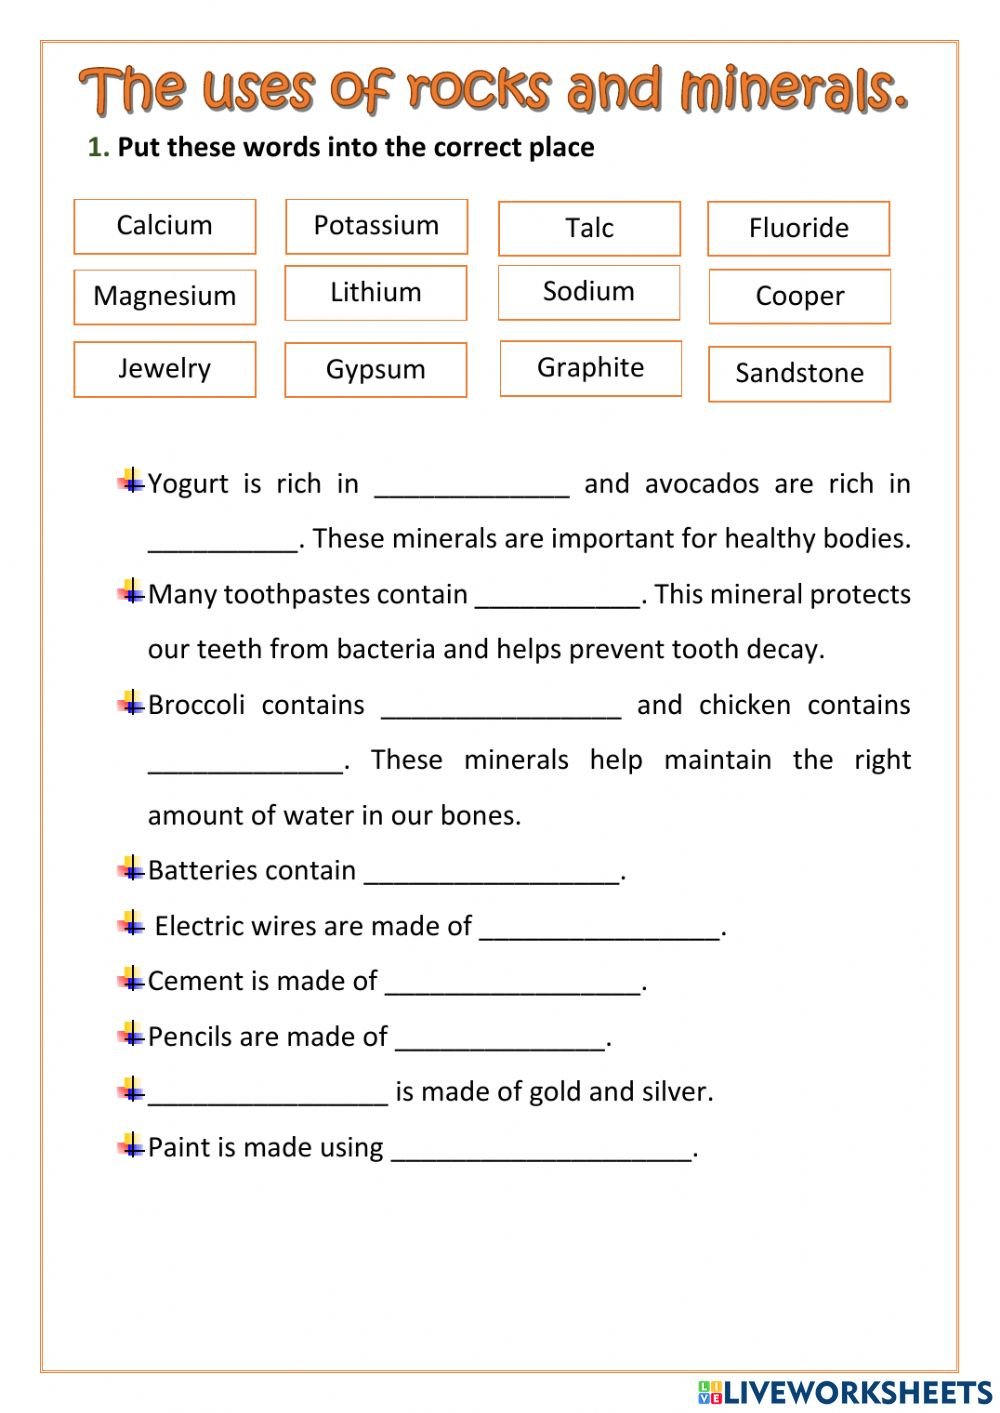 rocks-and-minerals-worksheets-worksheetscity